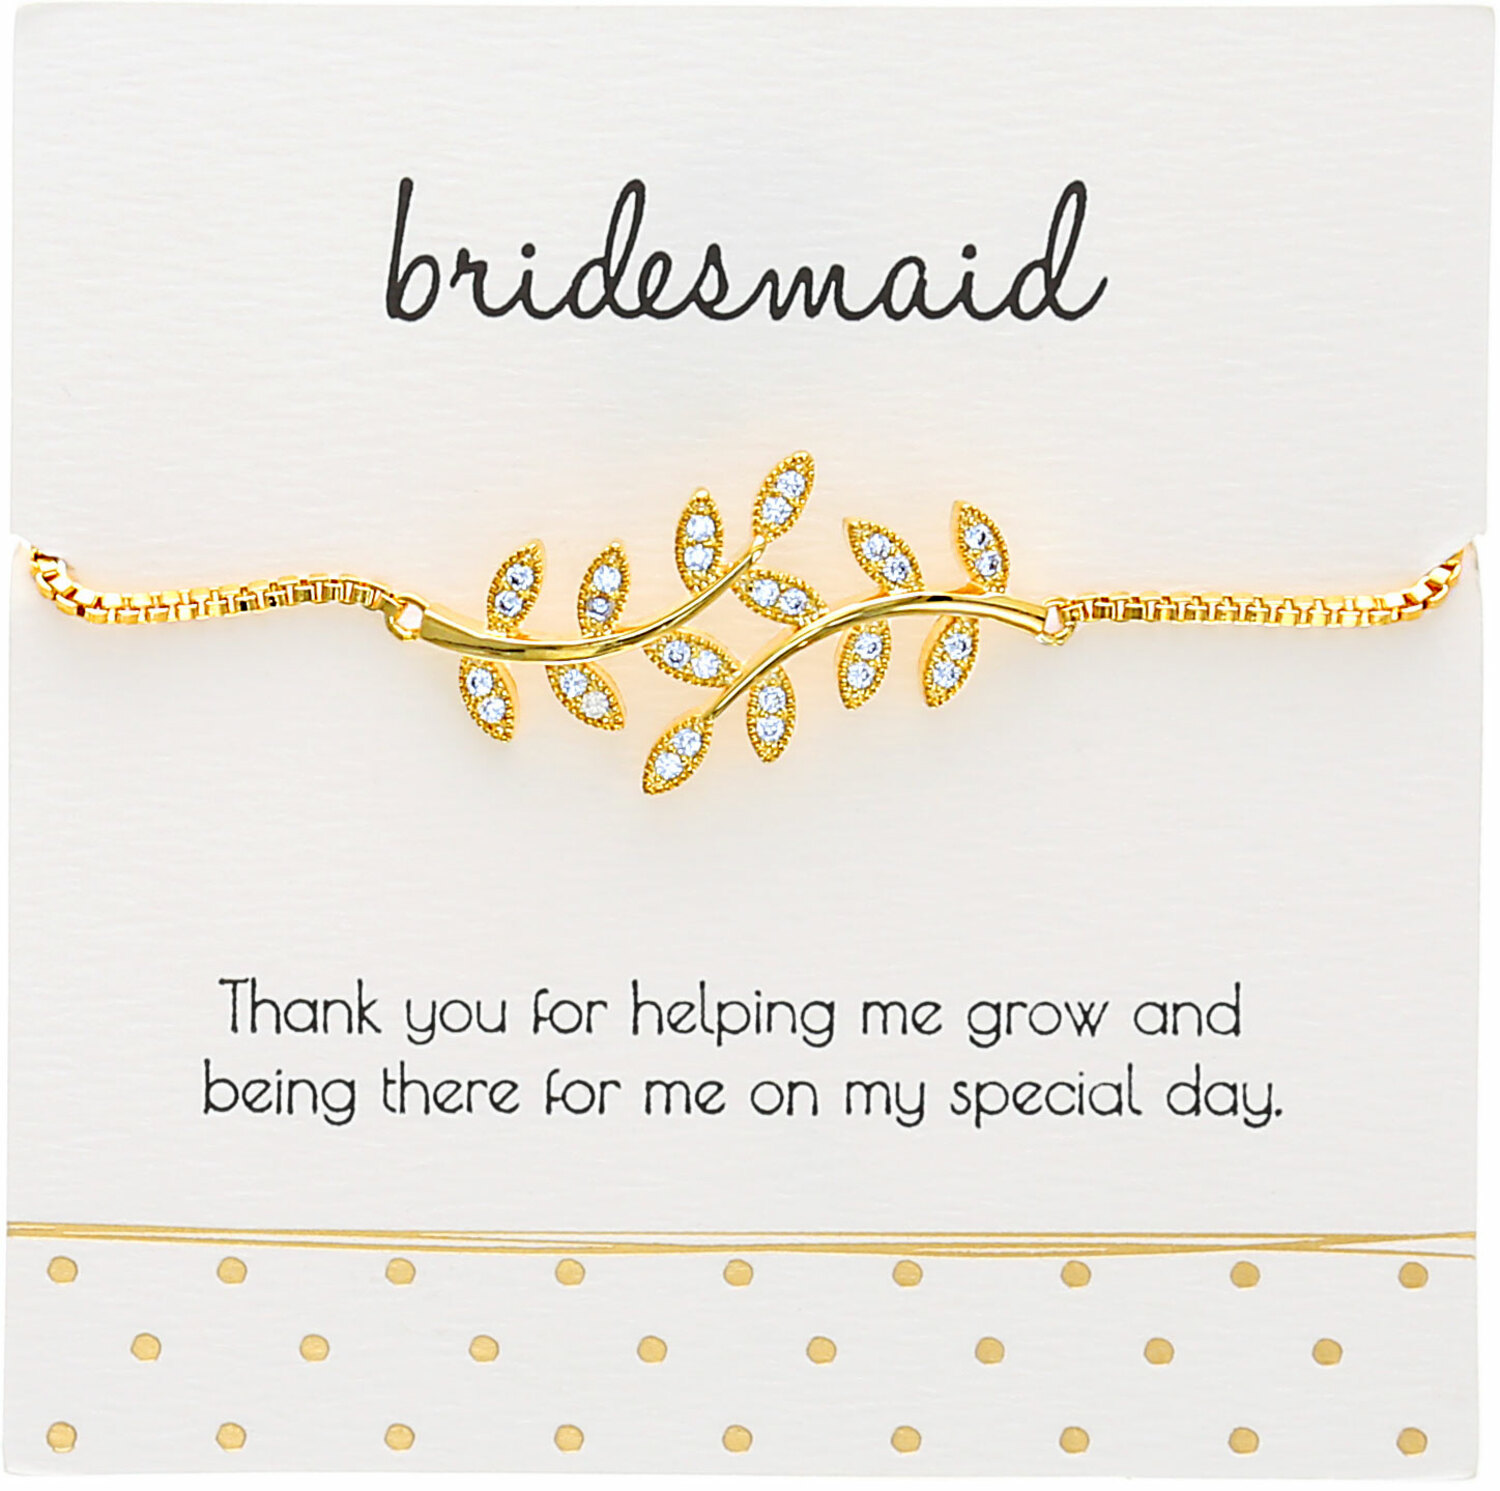 Bridesmaid - White Zircon Leaf by Love Grows - Bridesmaid - White Zircon Leaf - Gold Plated Adjustable Bracelet